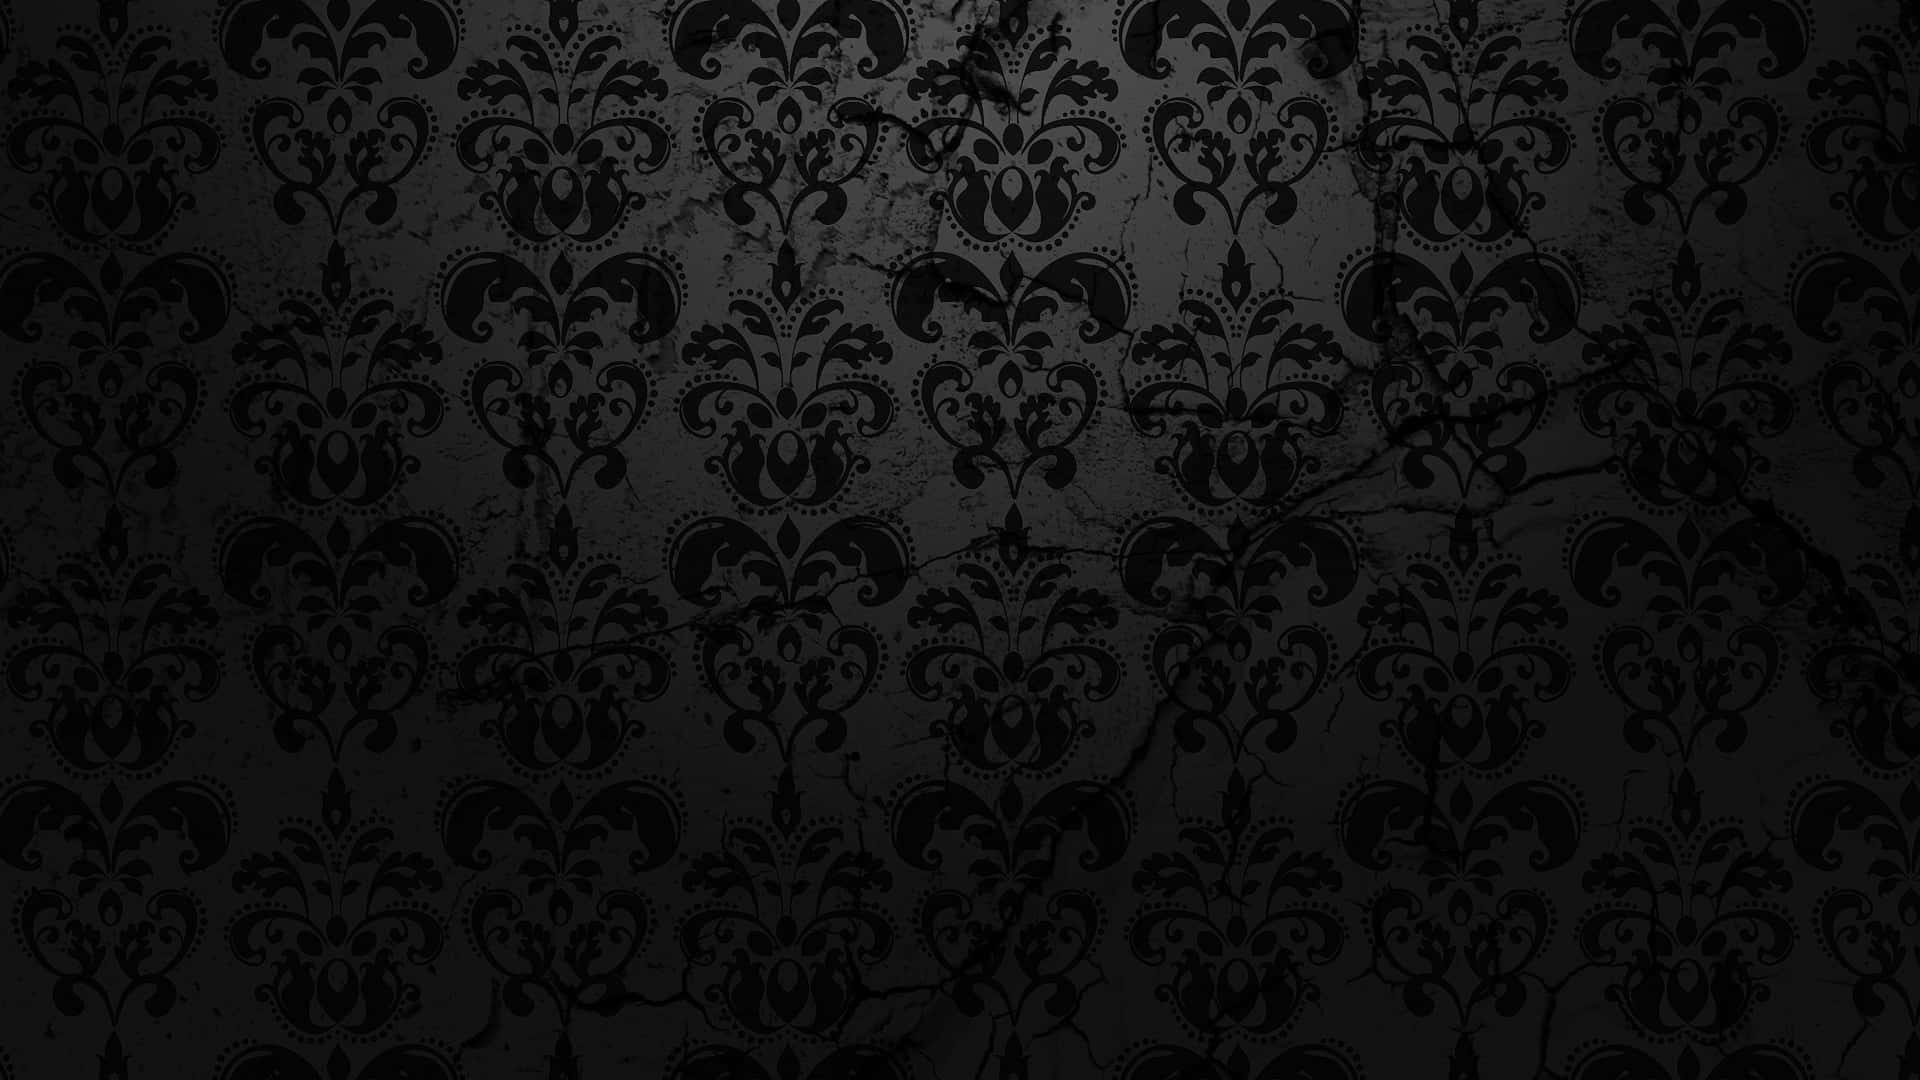 A gradient of black and gray tones for timeless elegance Wallpaper